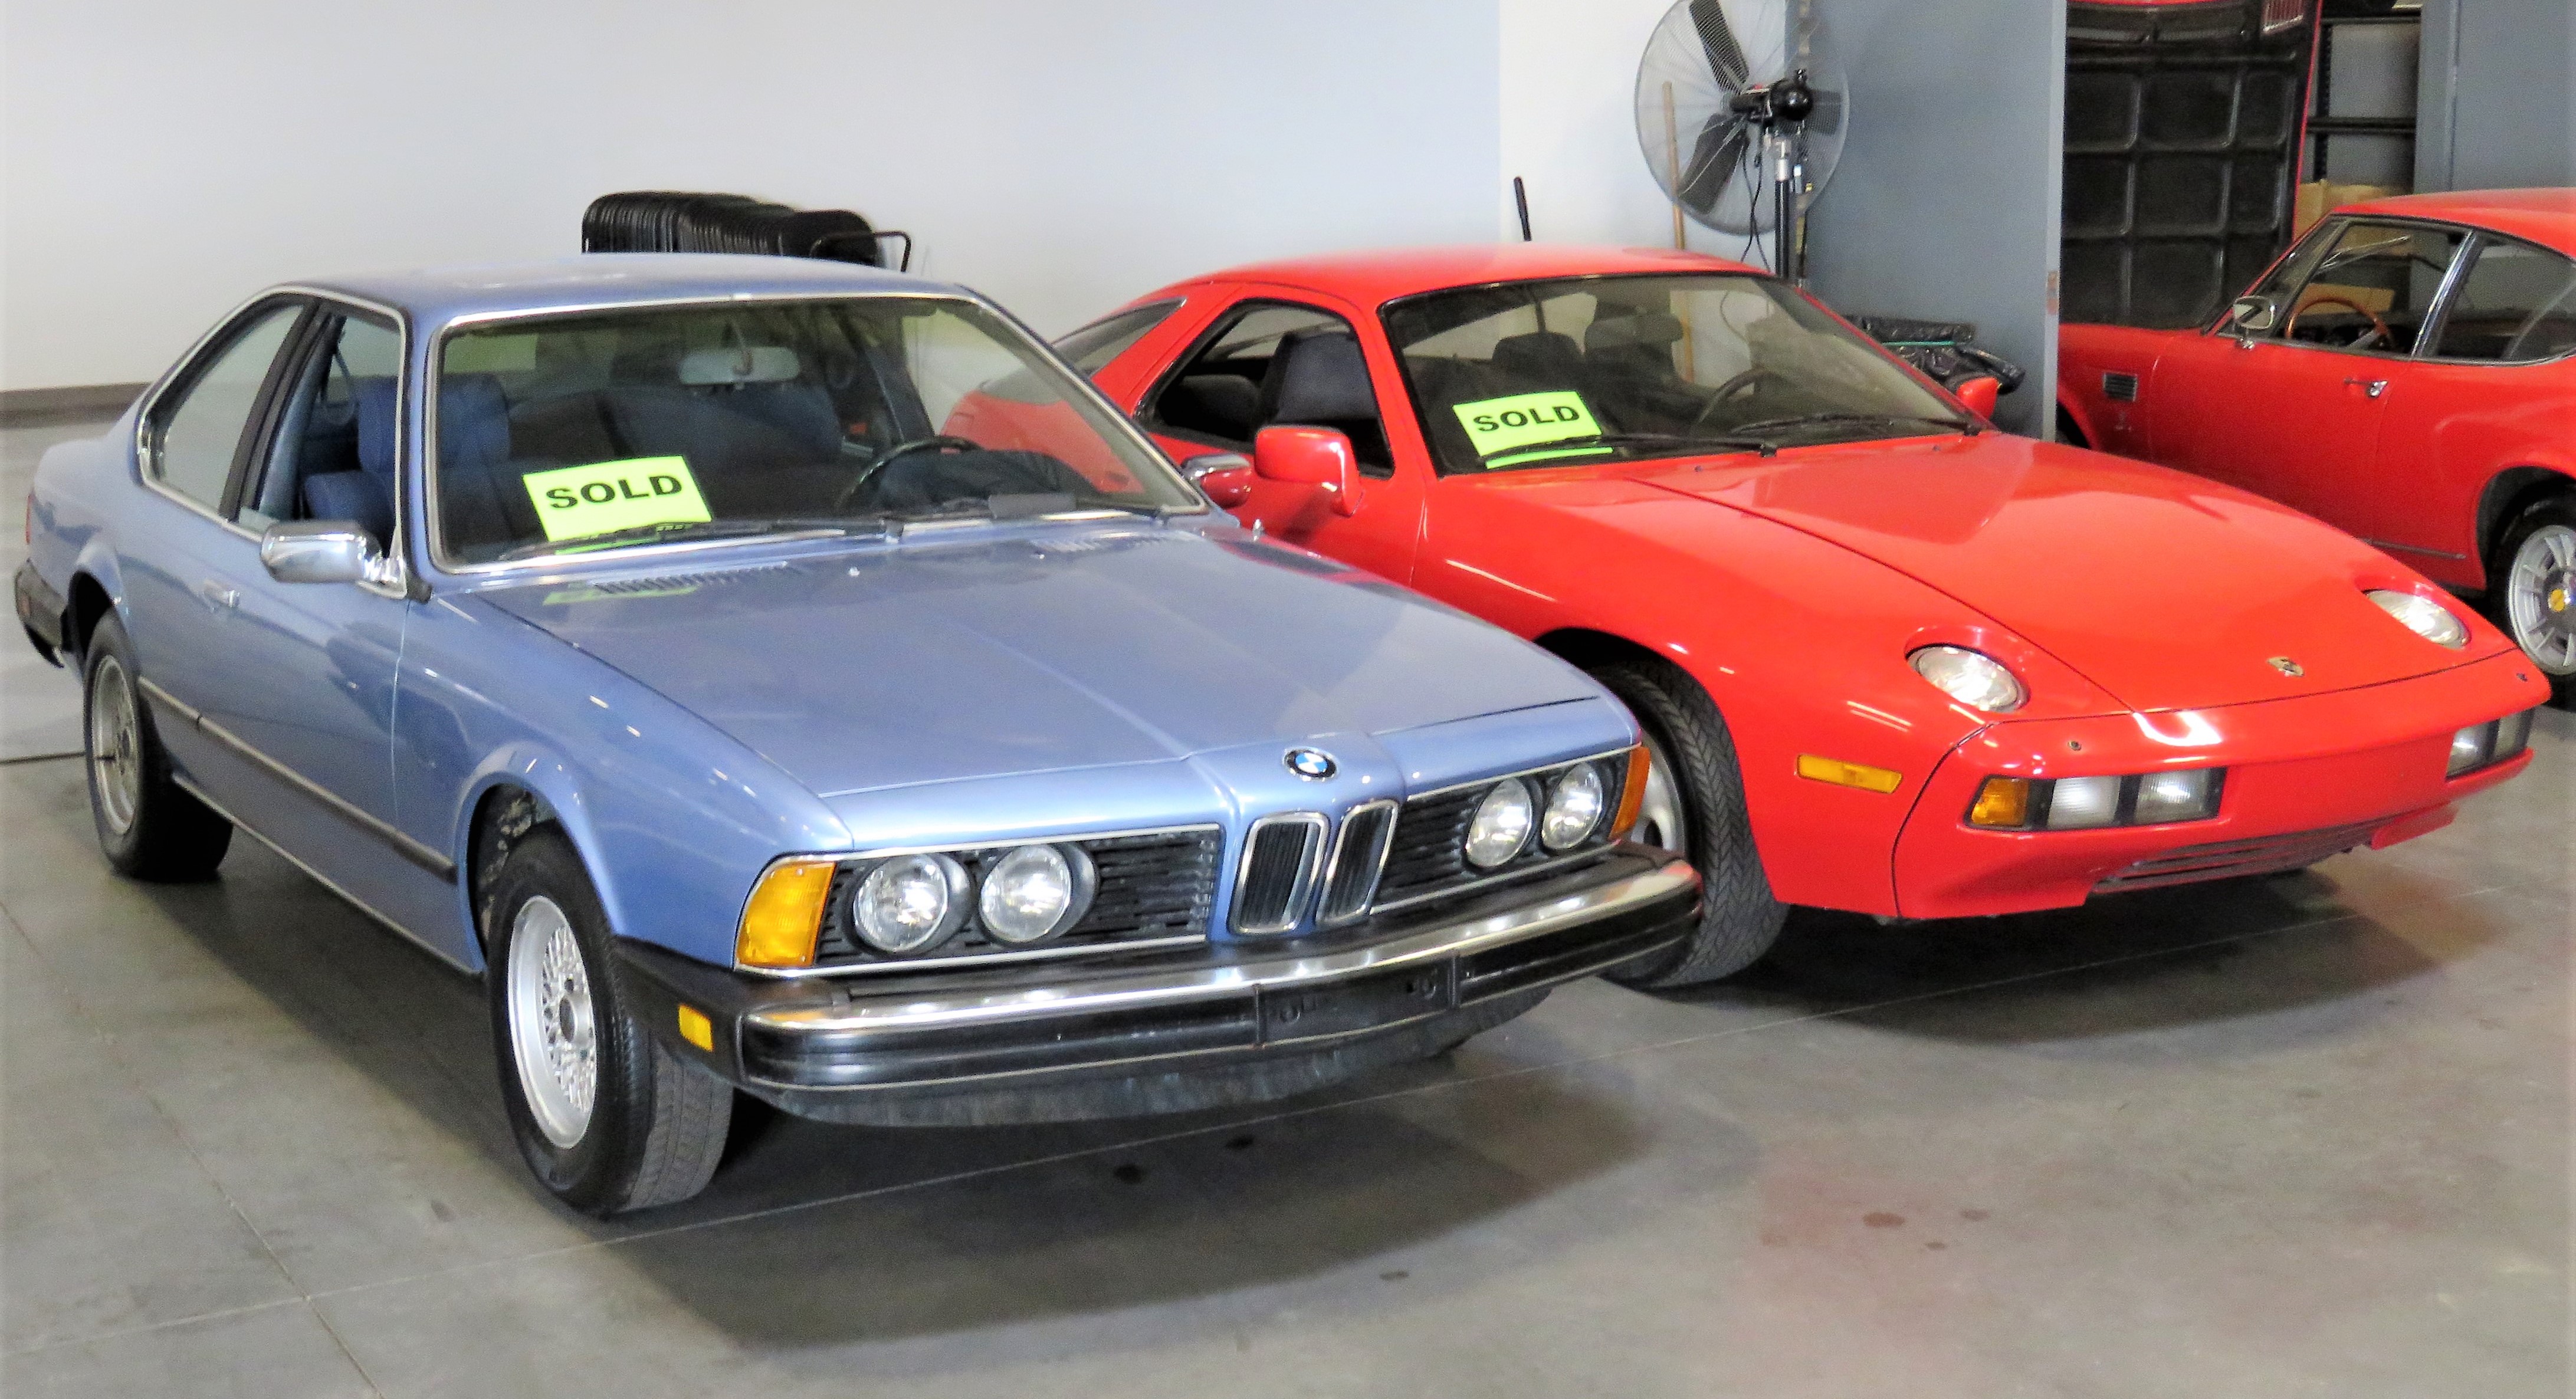 Influx of classic car dealers mean buying a classic car just got easier